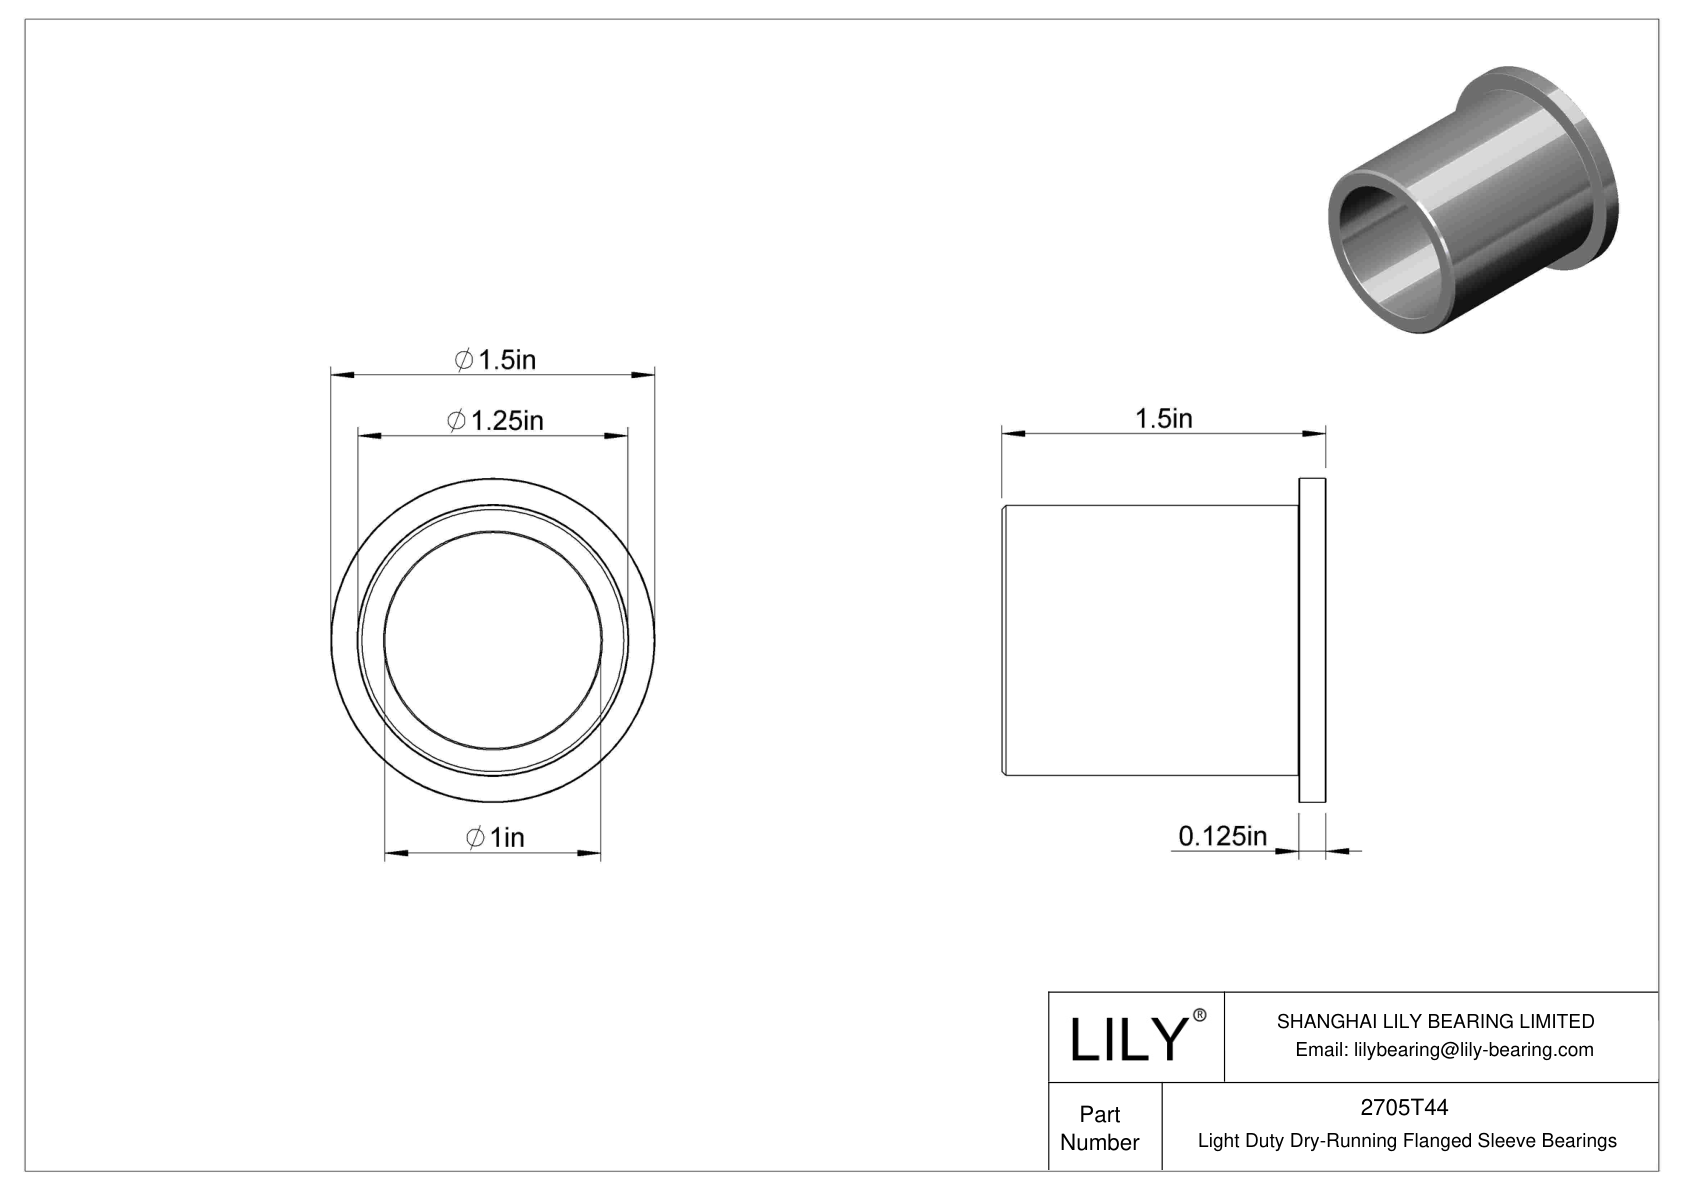 CHAFTEE Light Duty Dry-Running Flanged Sleeve Bearings cad drawing